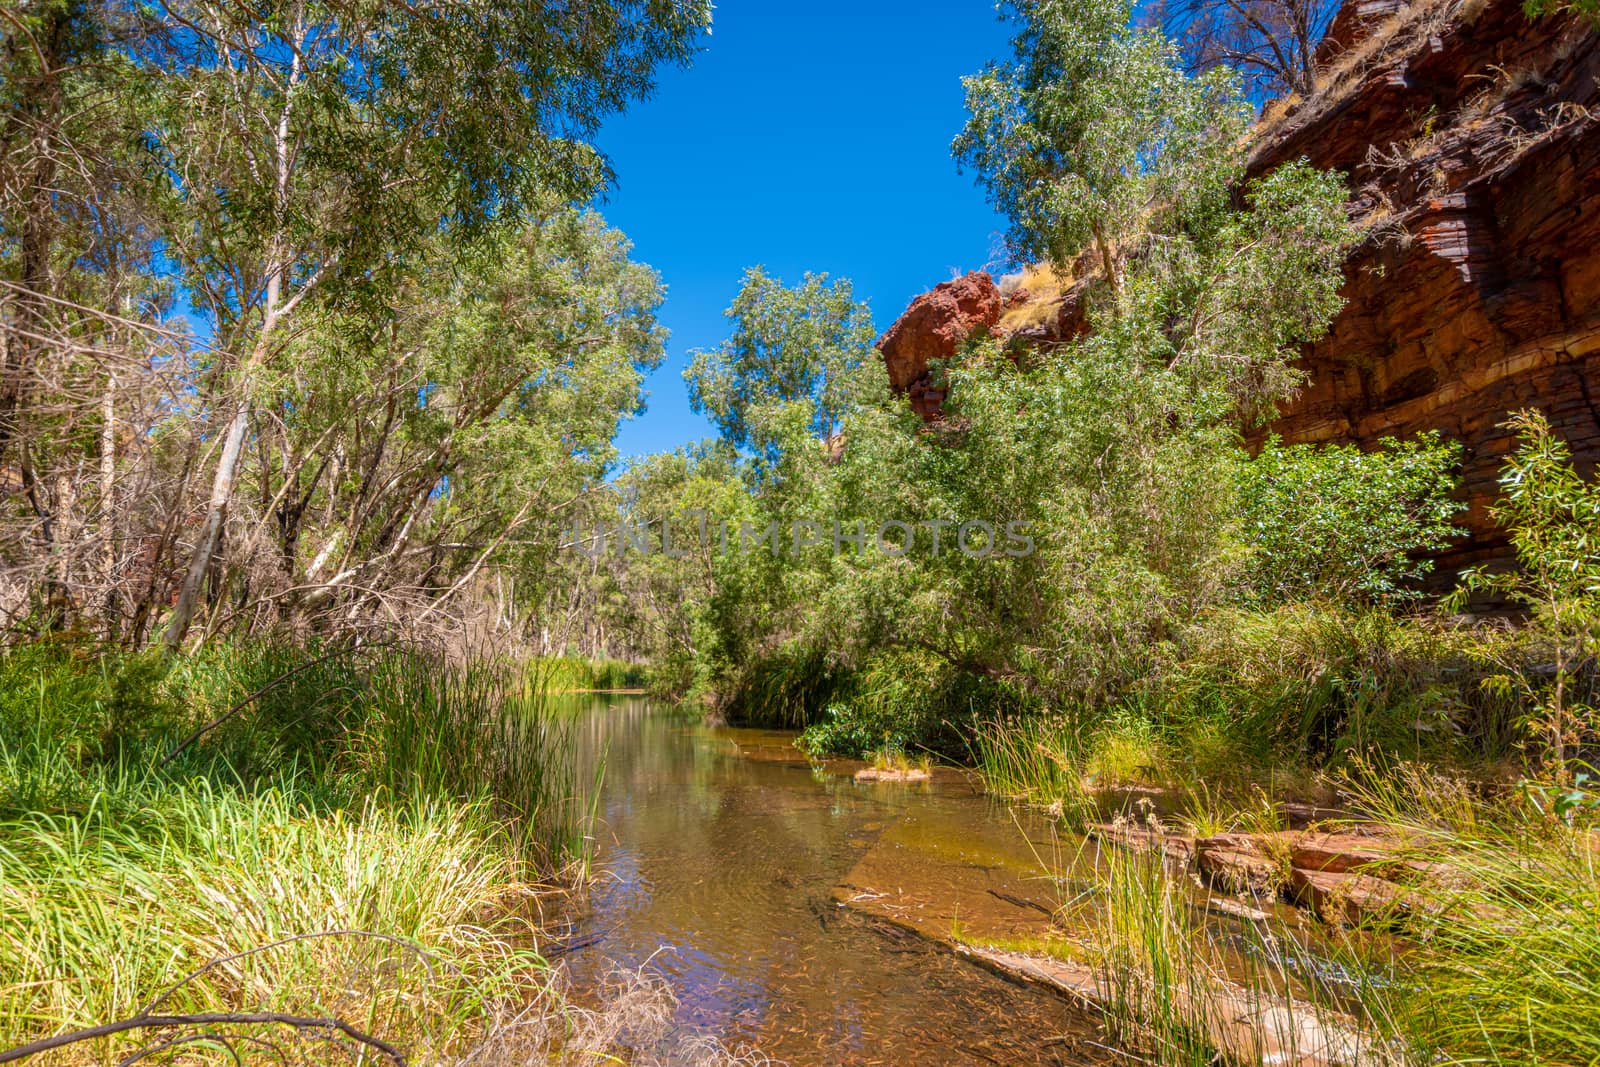 Hiking path at bottom of Dales Gorge leading to Circular Pool at Karijini National Park by MXW_Stock